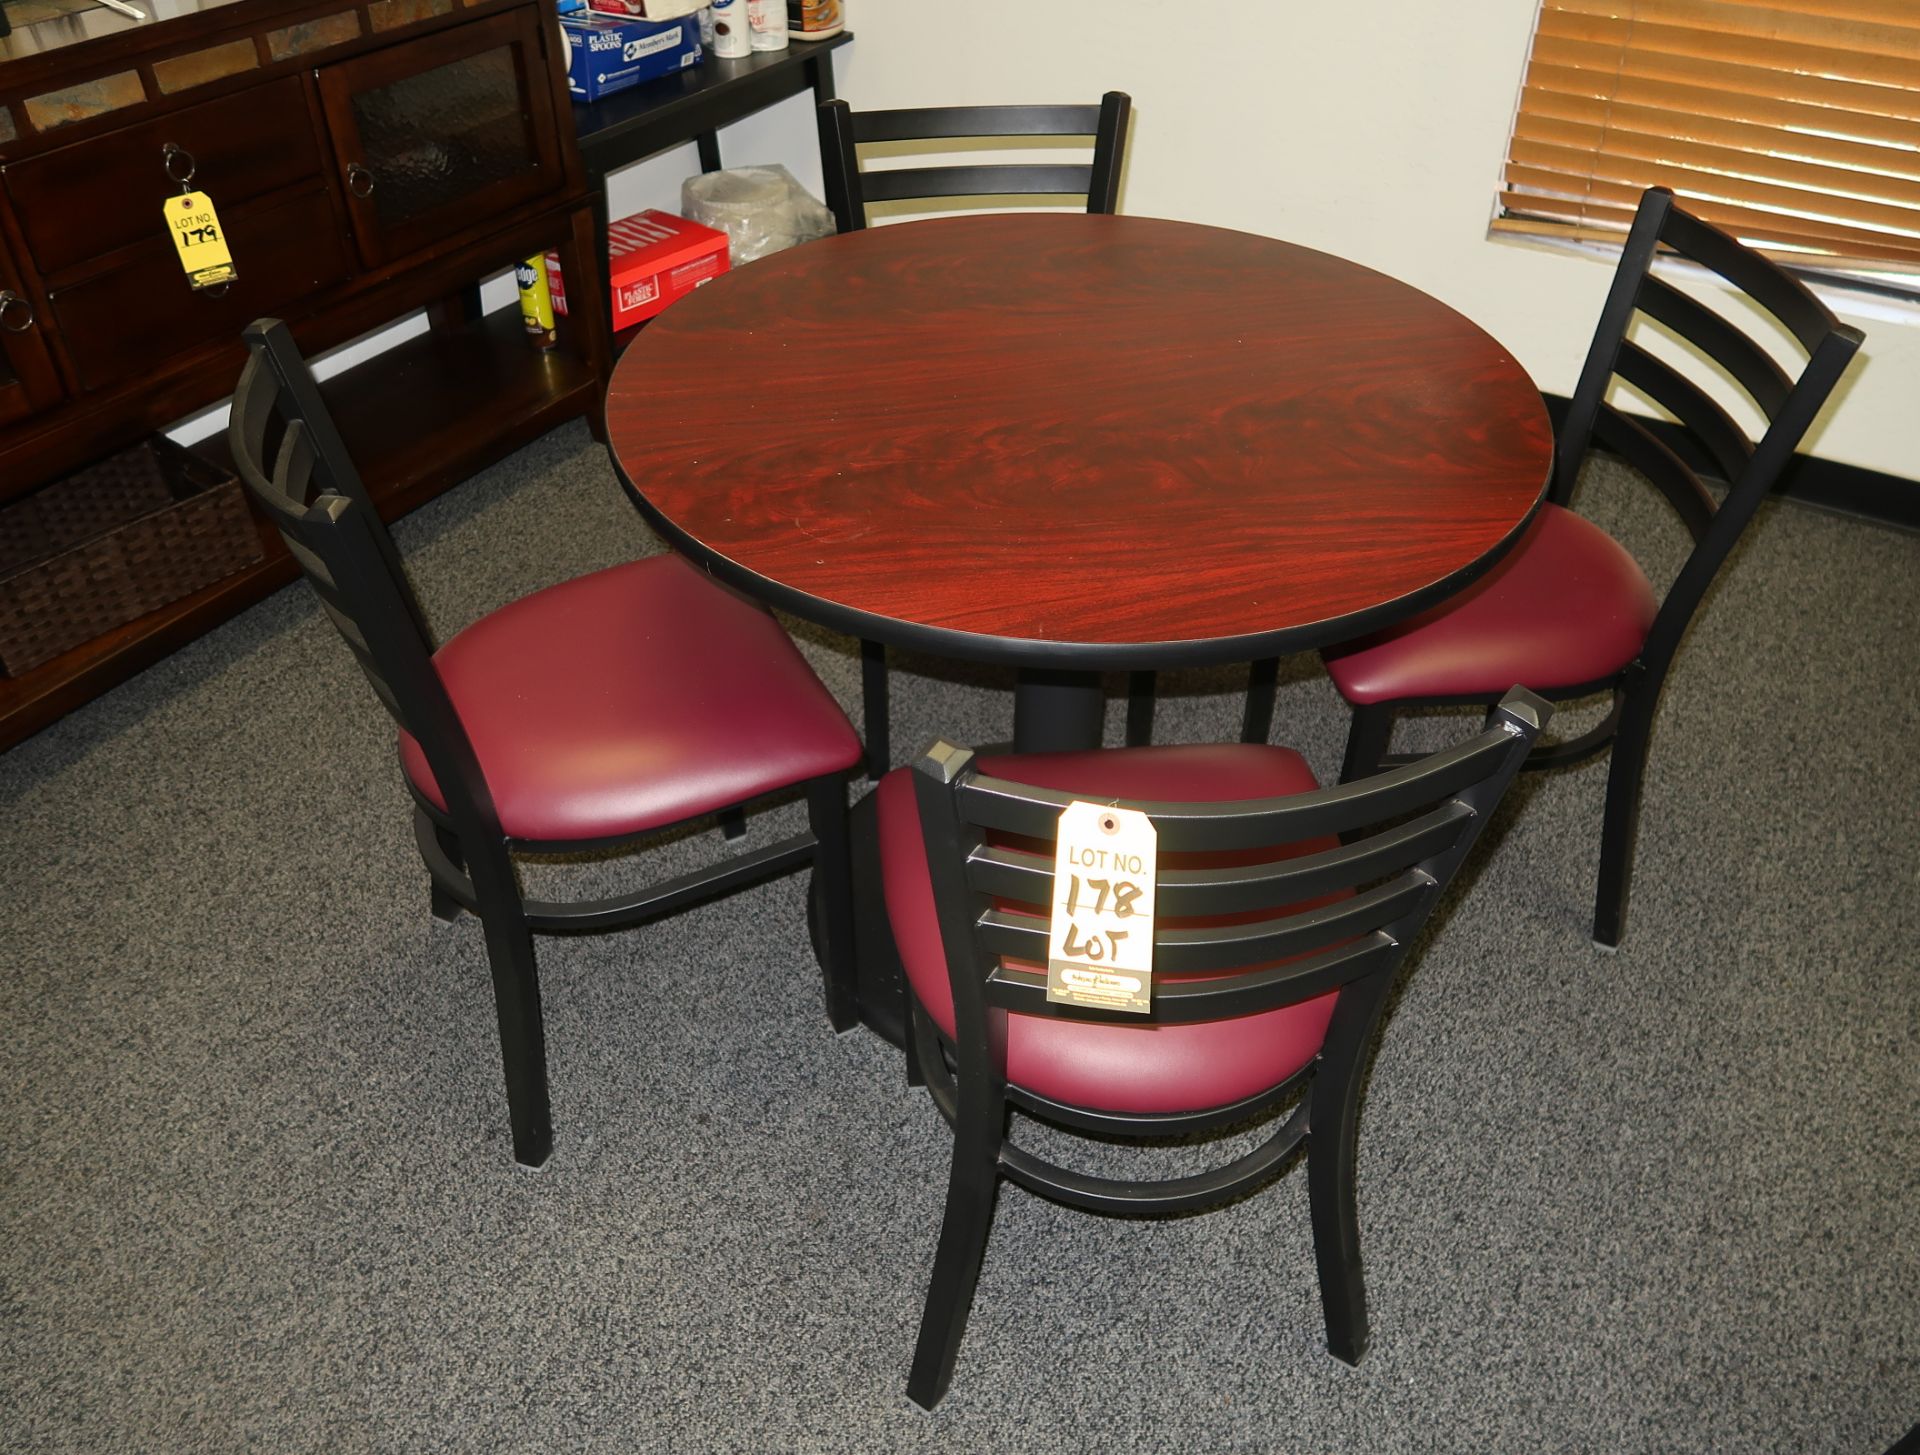 LOT ROUND TABLE W/4-CHAIRS